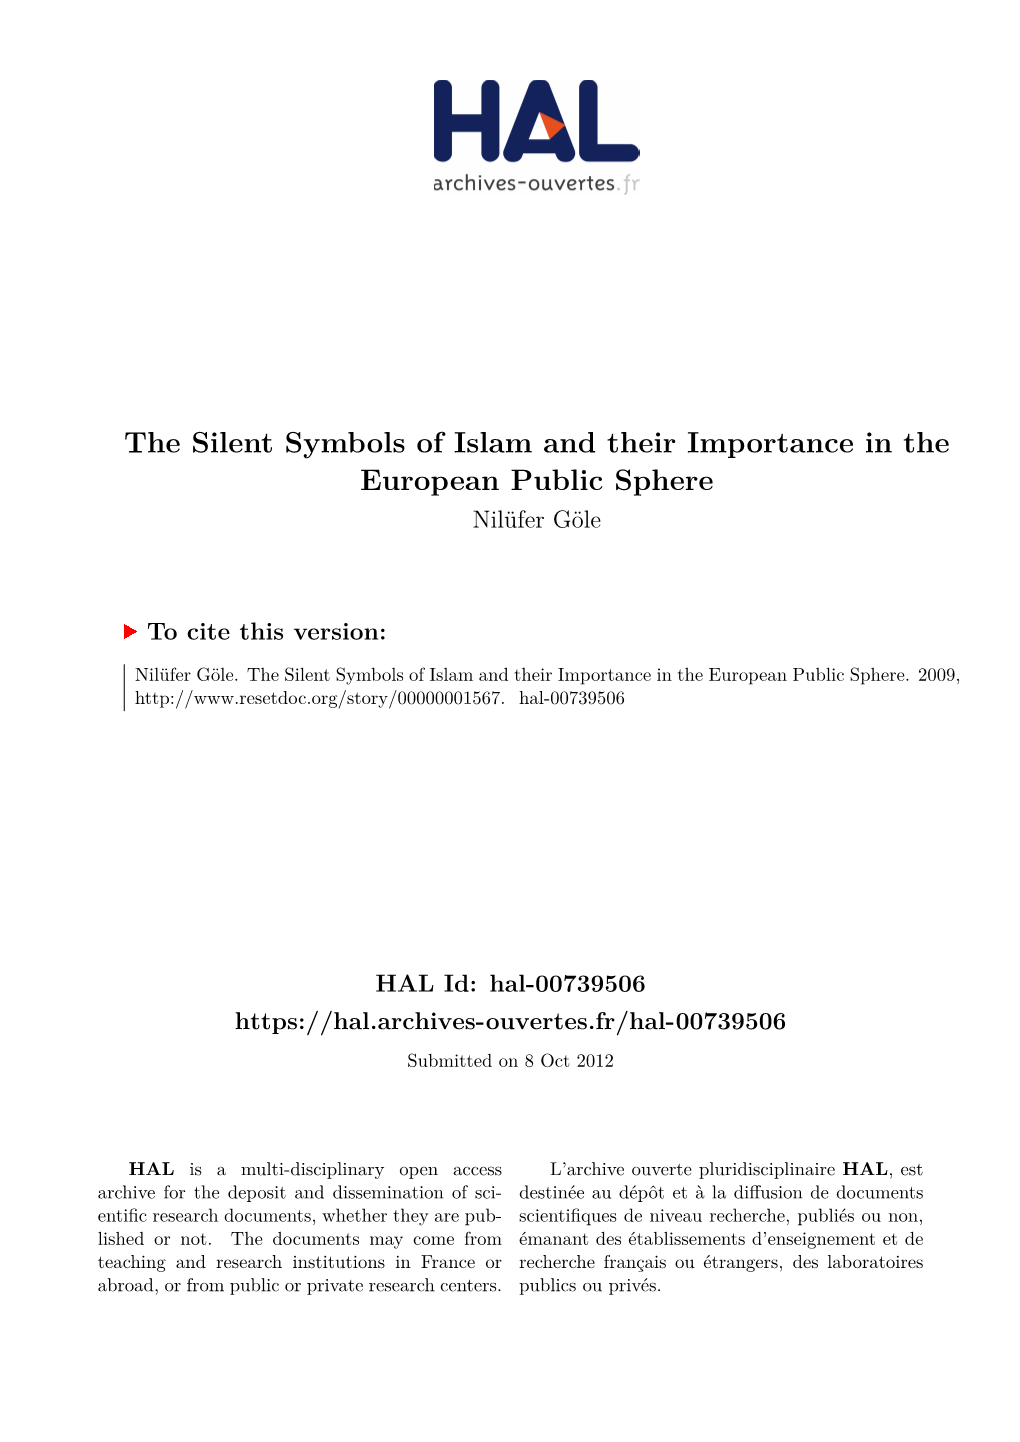 The Silent Symbols of Islam and Their Importance in the European Public Sphere Nilüfer Göle